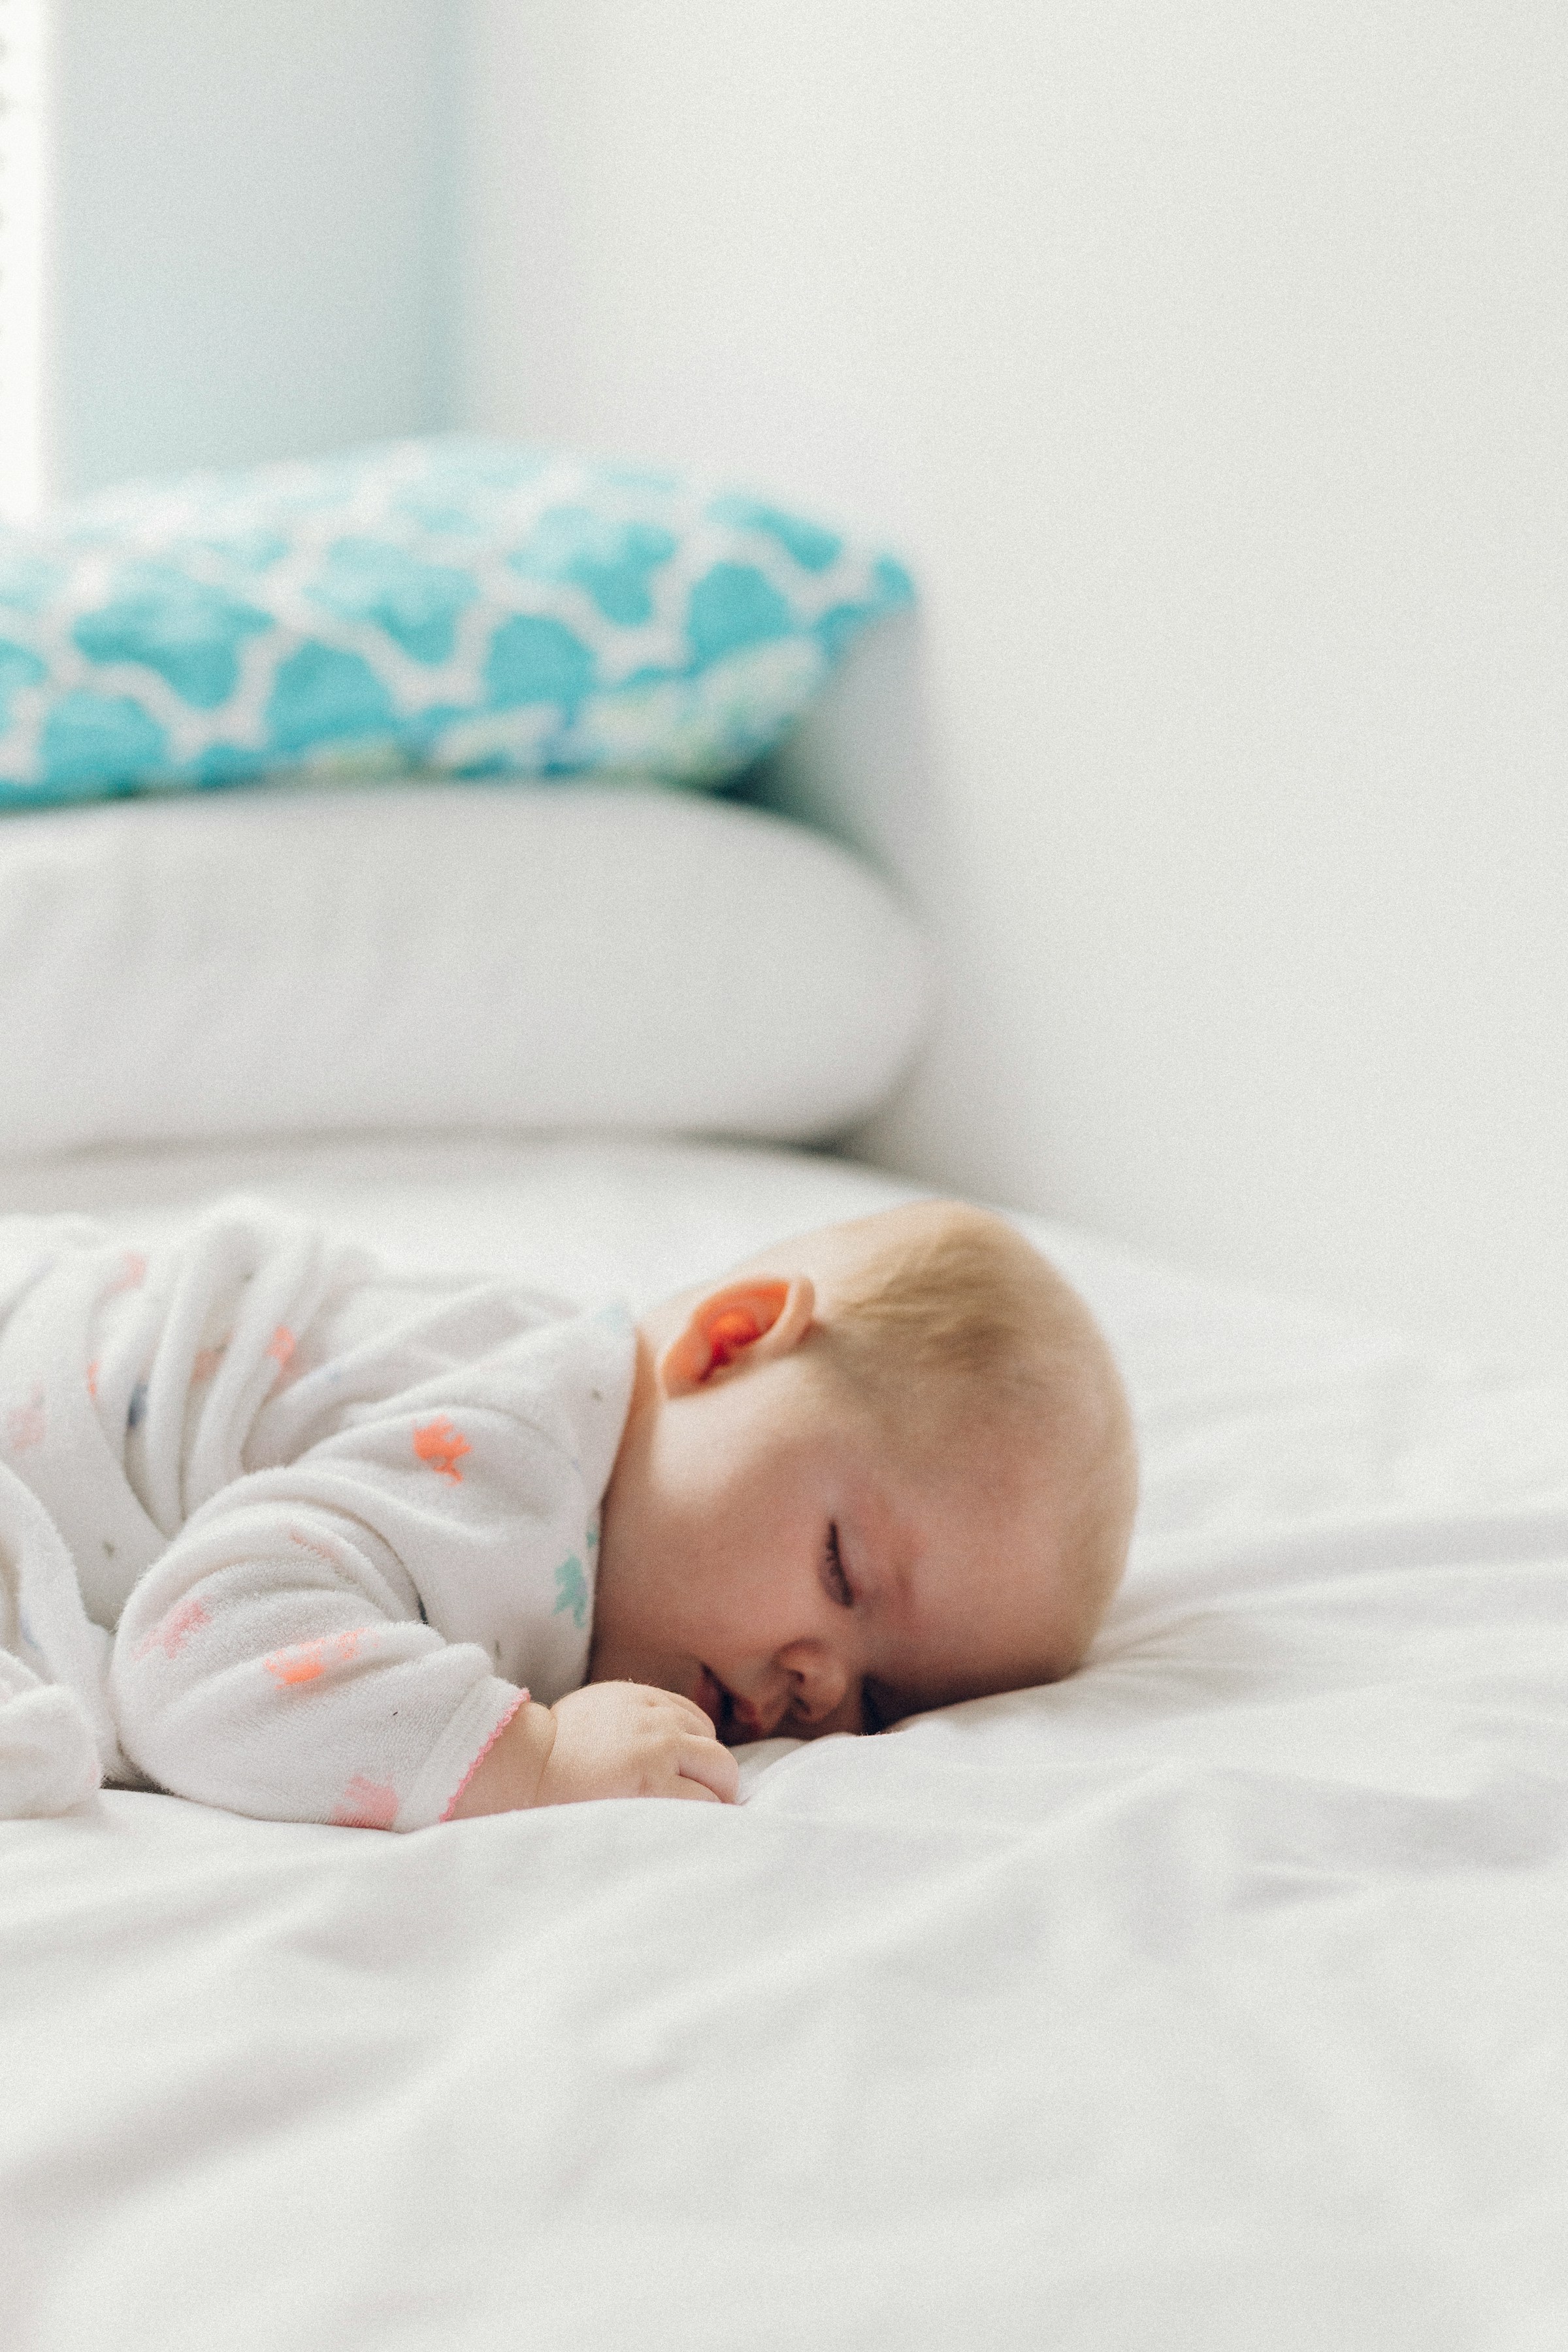 After a long struggle, Mila manages to rock her baby back to sleep | Source: Unsplash